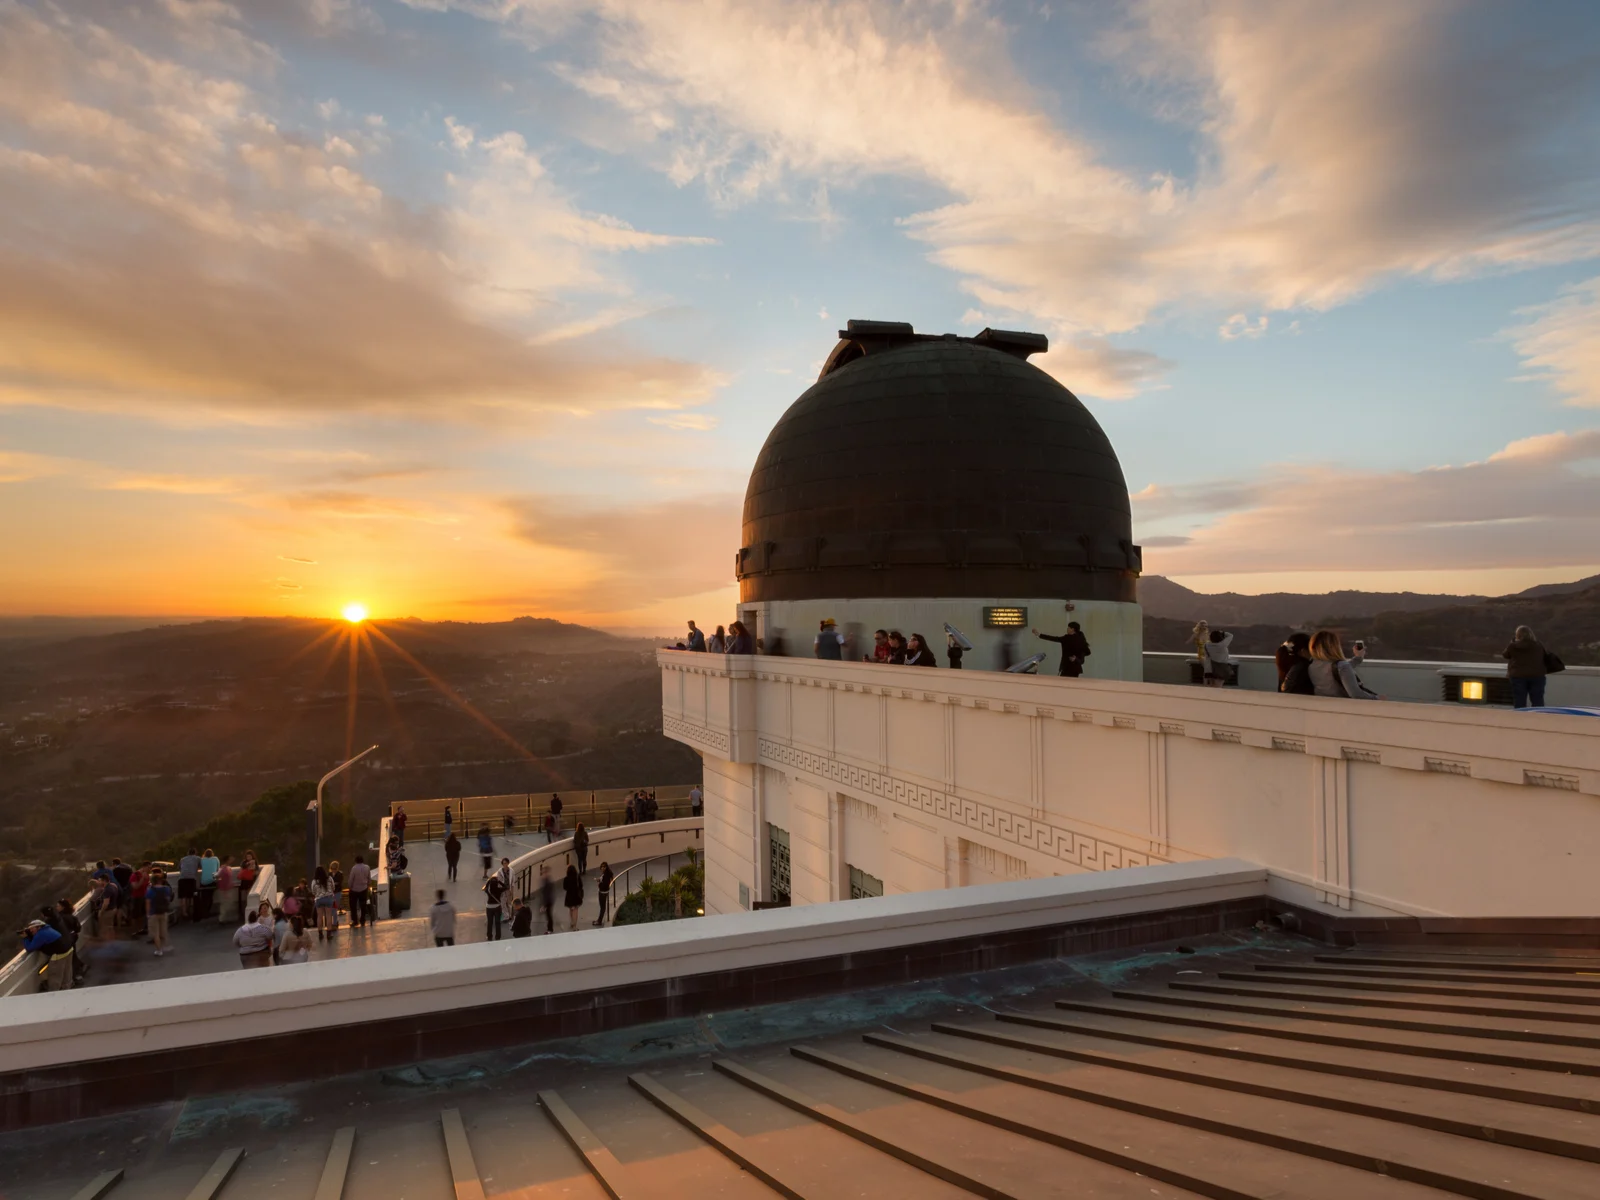 Griffith Observatory, one of the top things to do in Los Angeles, pictured at dusk with a close up of the telescope structure